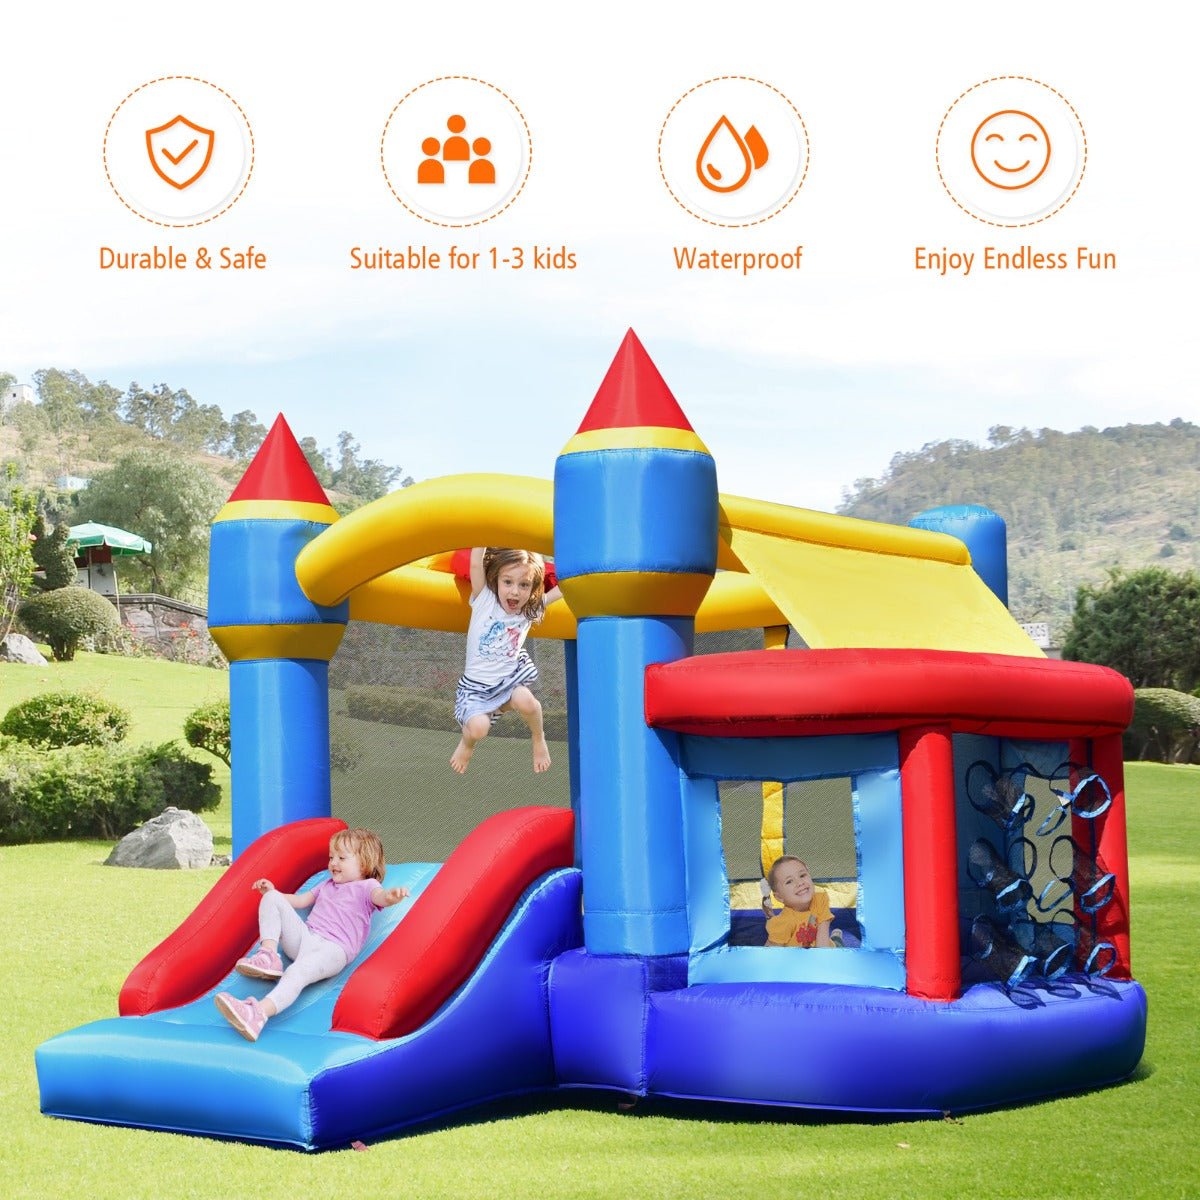 Active Entertainment: Multifunctional Inflatable Bouncer with Slide (Blower Included)